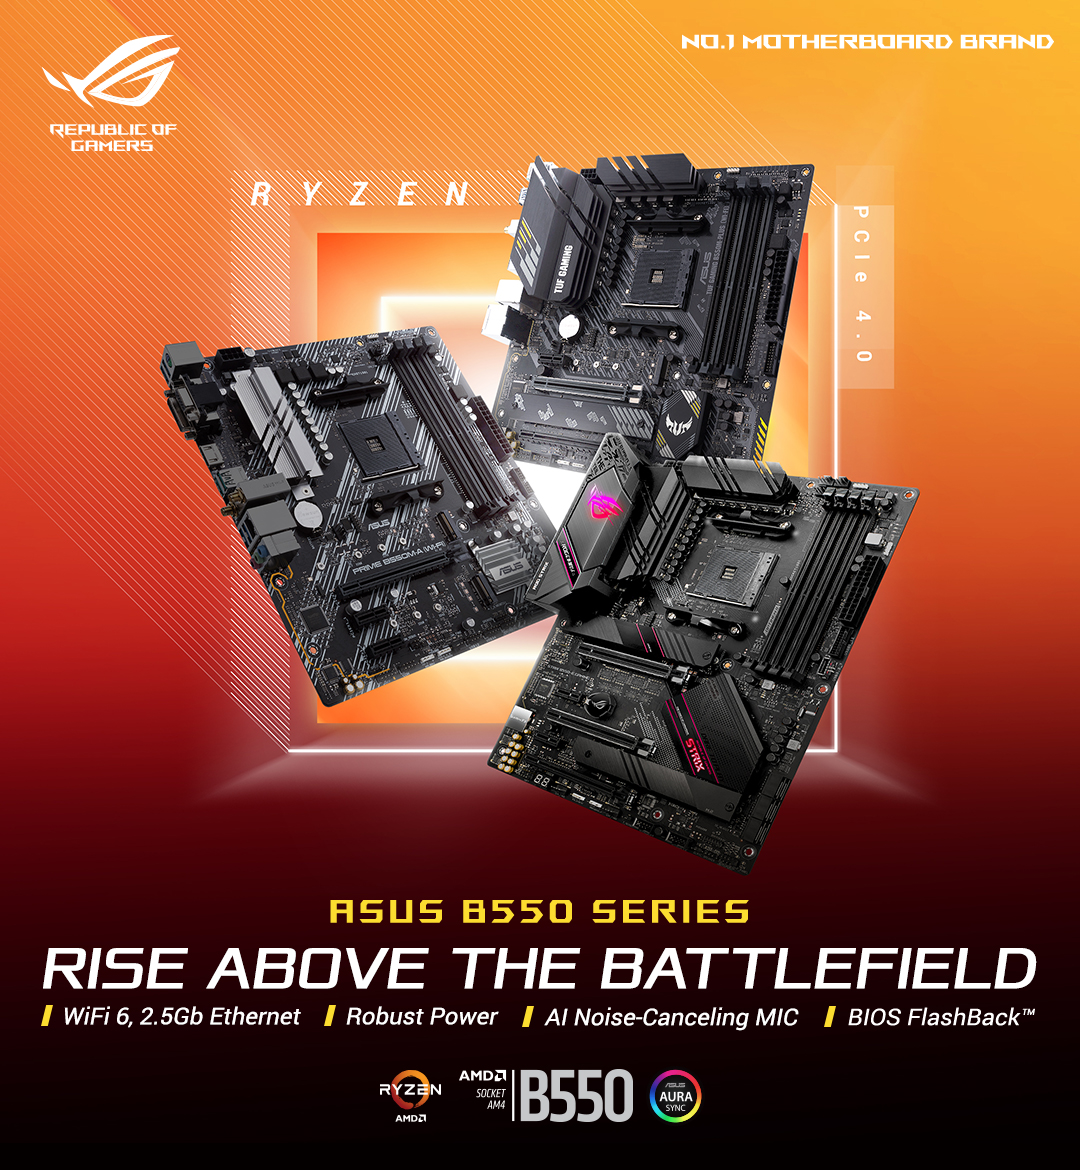 ASUS │ ASUS B550 series｜PC専門店【ツクモ】公式通販サイト